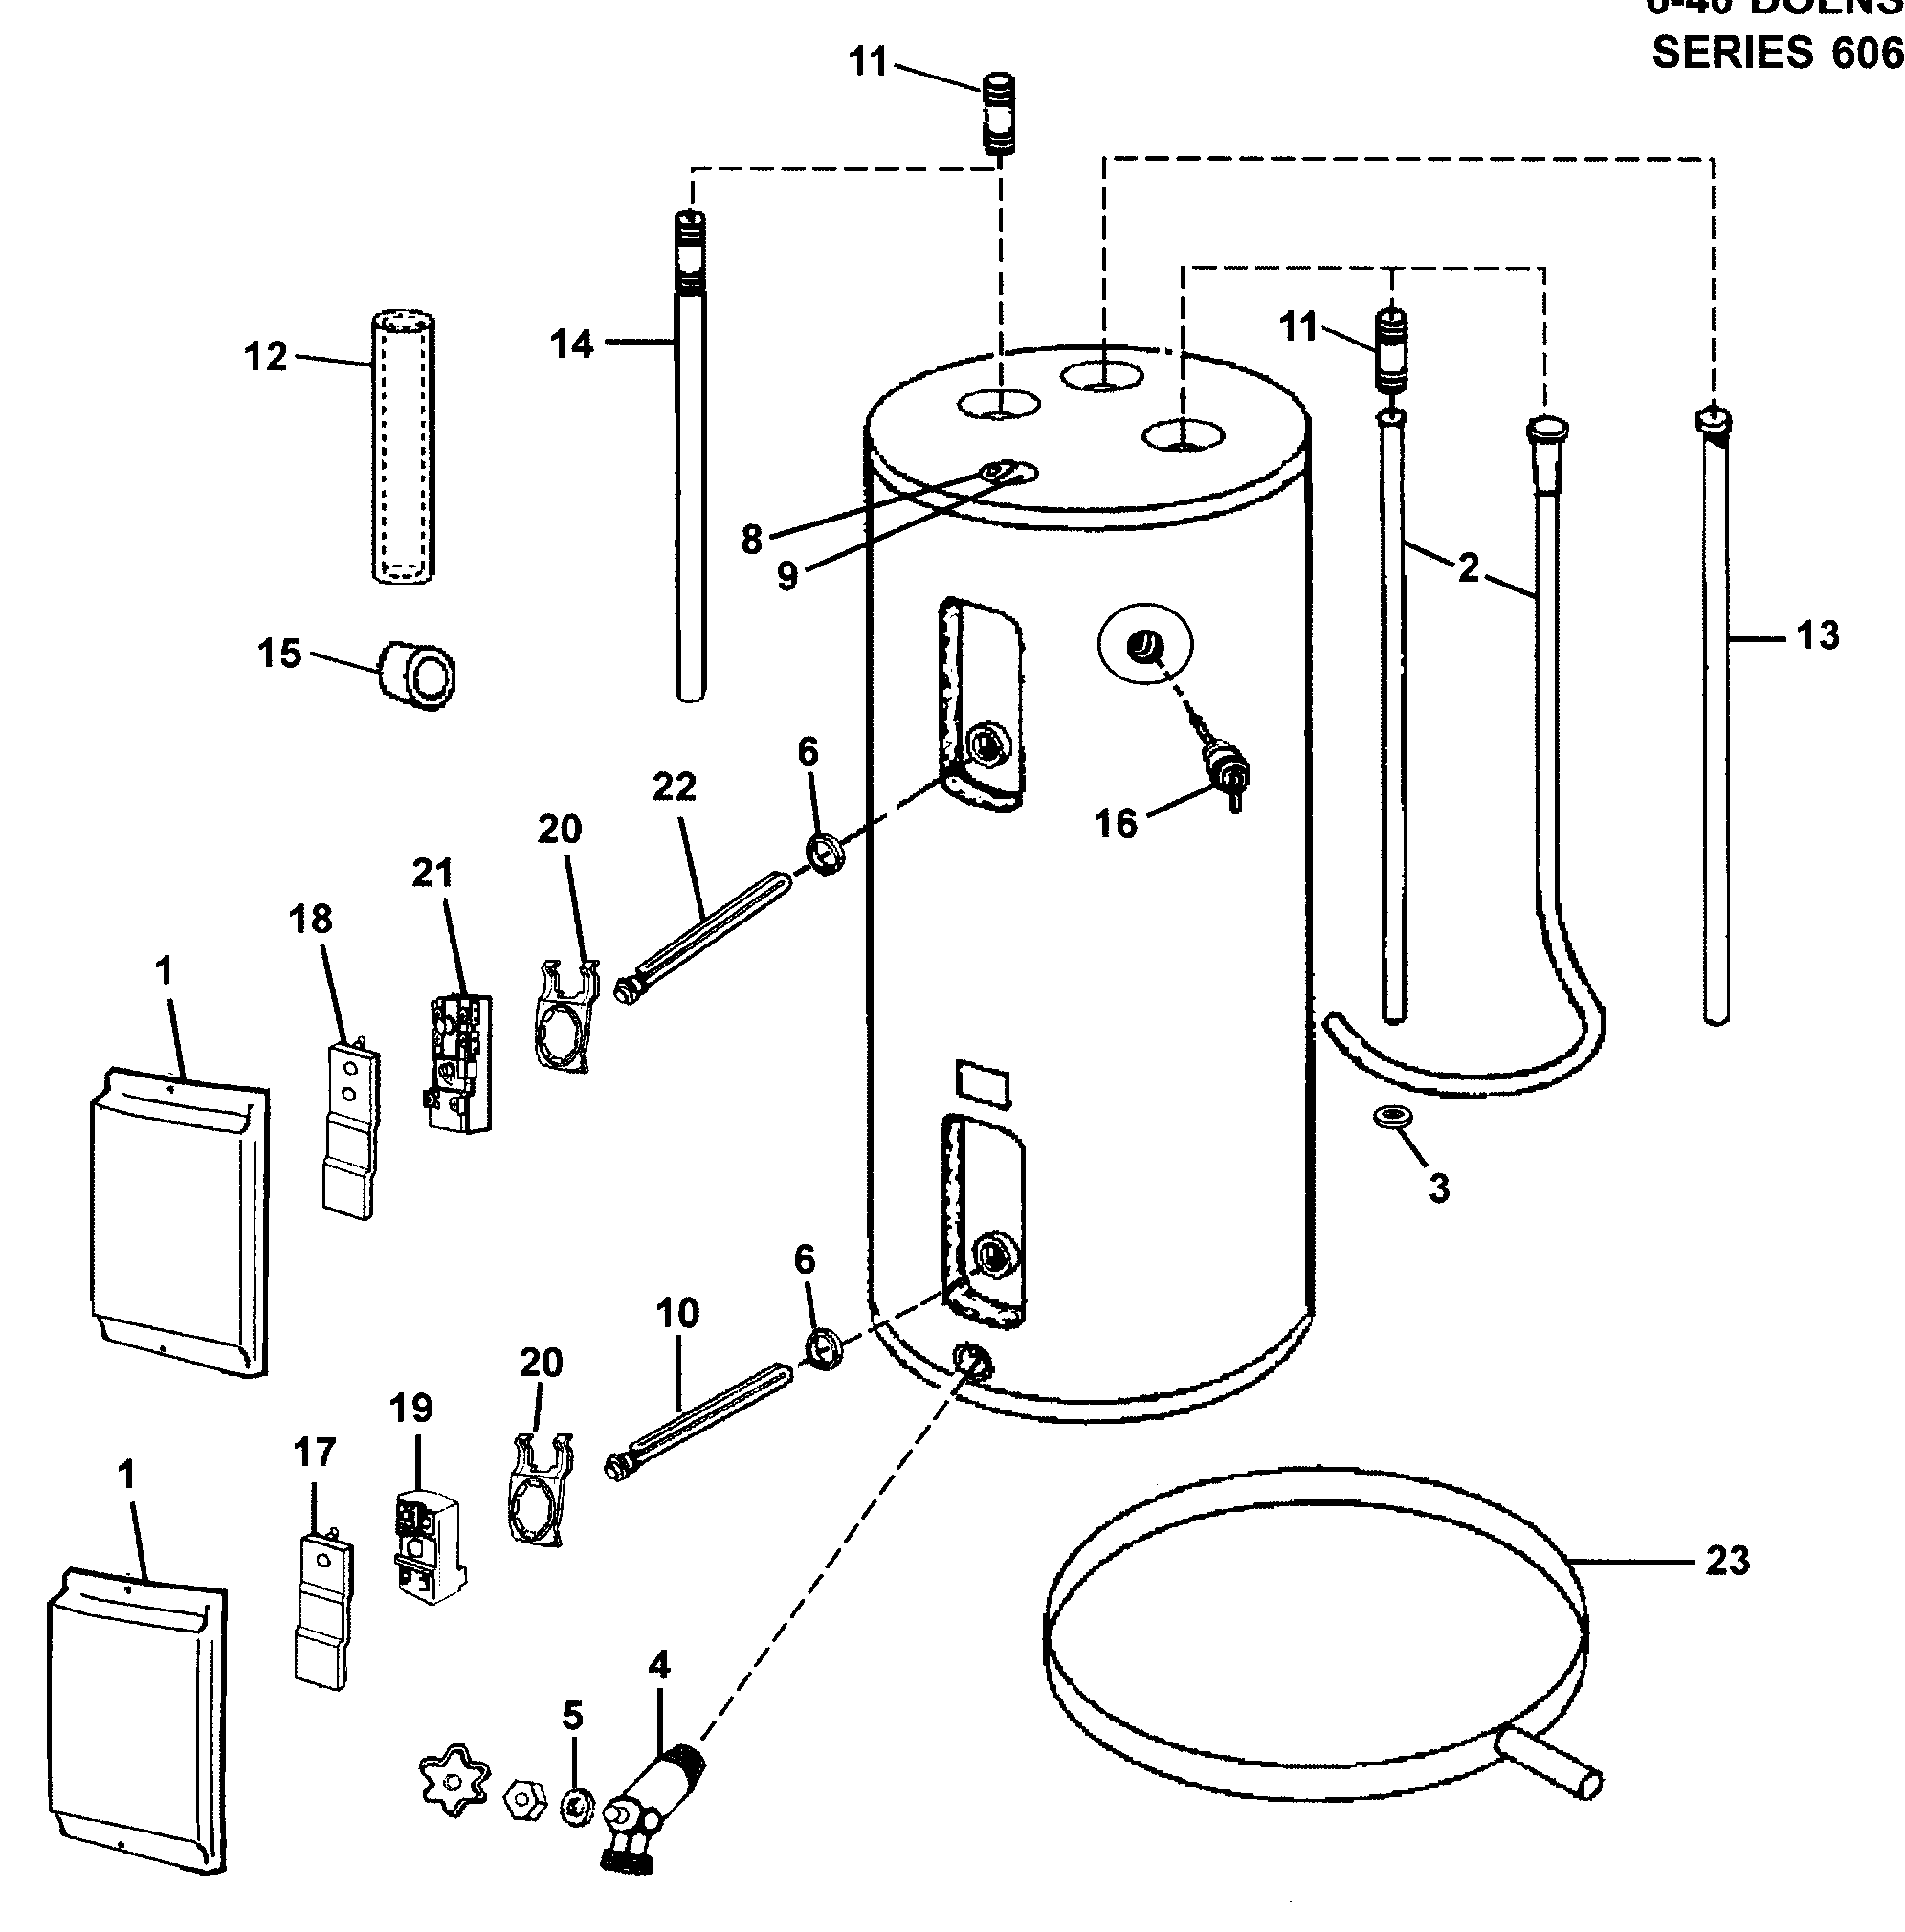 Hot Water Heater Thermostat Wiring Diagram from c.searspartsdirect.com